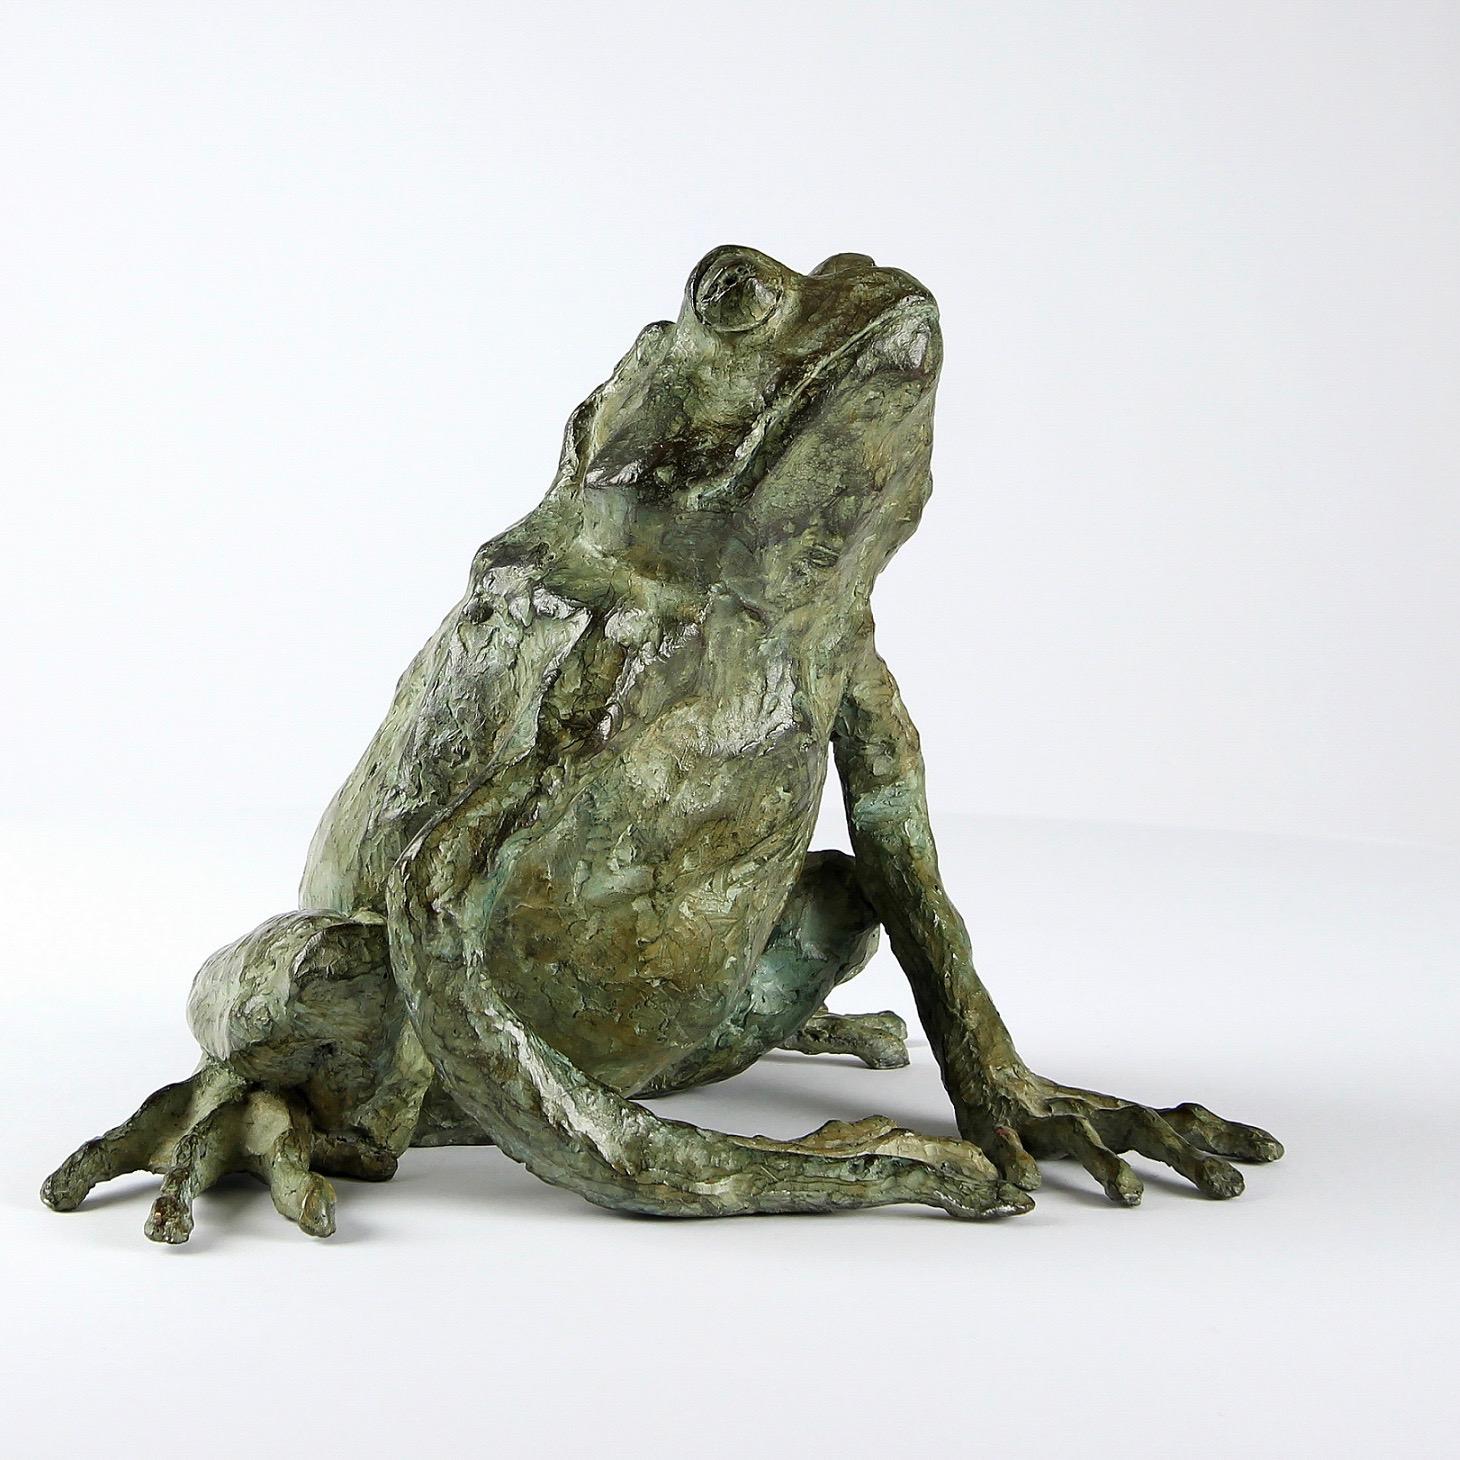 Magic Frog is a bronze sculpture by contemporary artist Chésade, dimensions are 17 × 14 × 12 cm (6.7 × 5.5 × 4.7 in). 
The sculpture is signed and numbered, it is part of a limited edition of 8 editions + 4 artist’s proofs, and comes with a